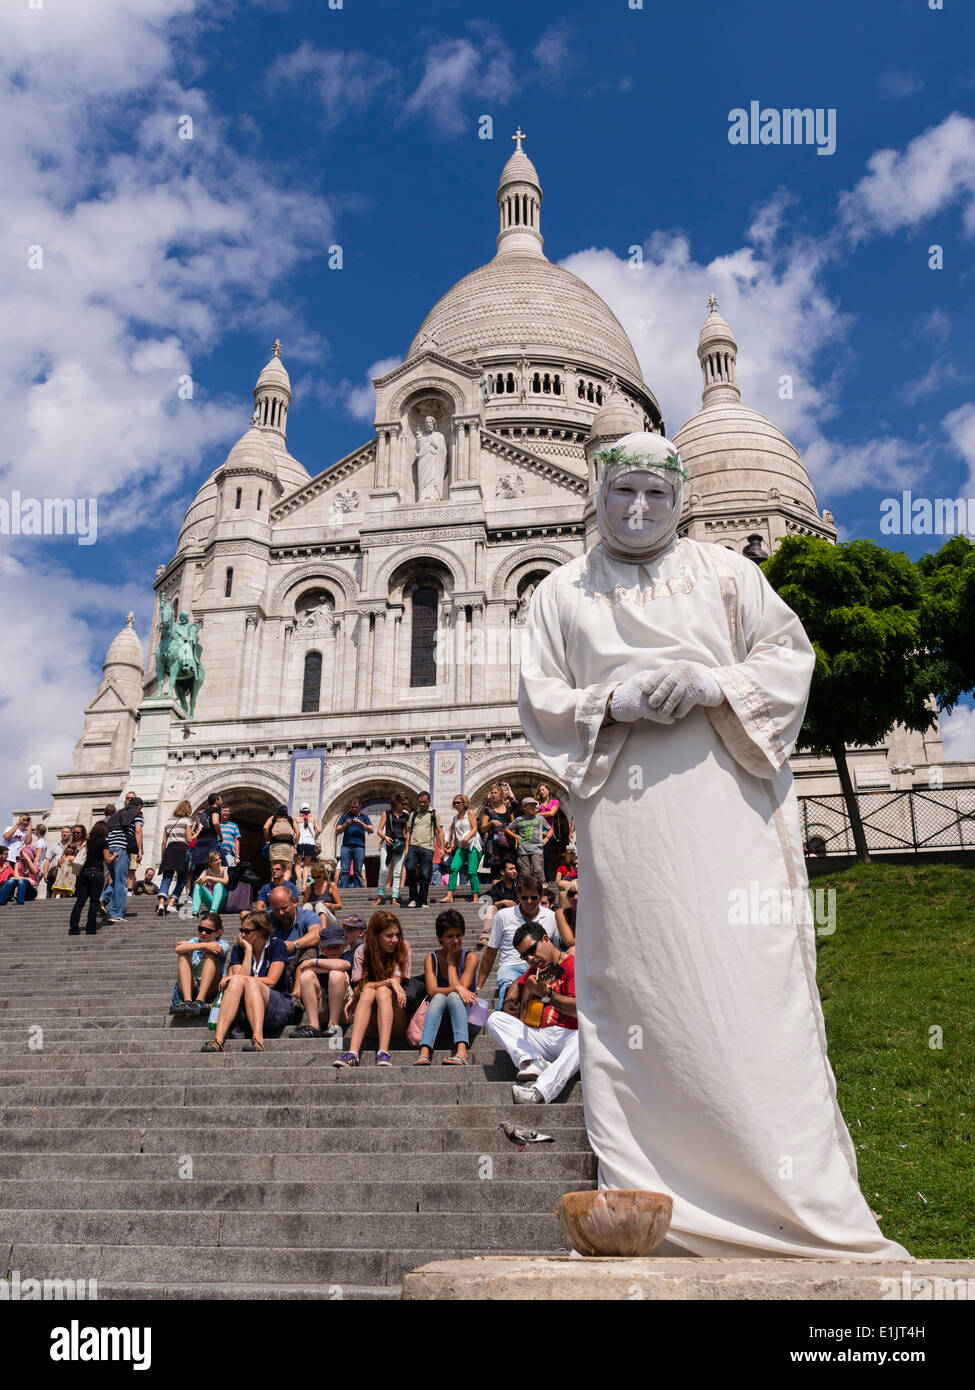 A street artist performs in front of the Basilica of the Sacre Coeur on the Montmartre hill in Paris. Stock Photo